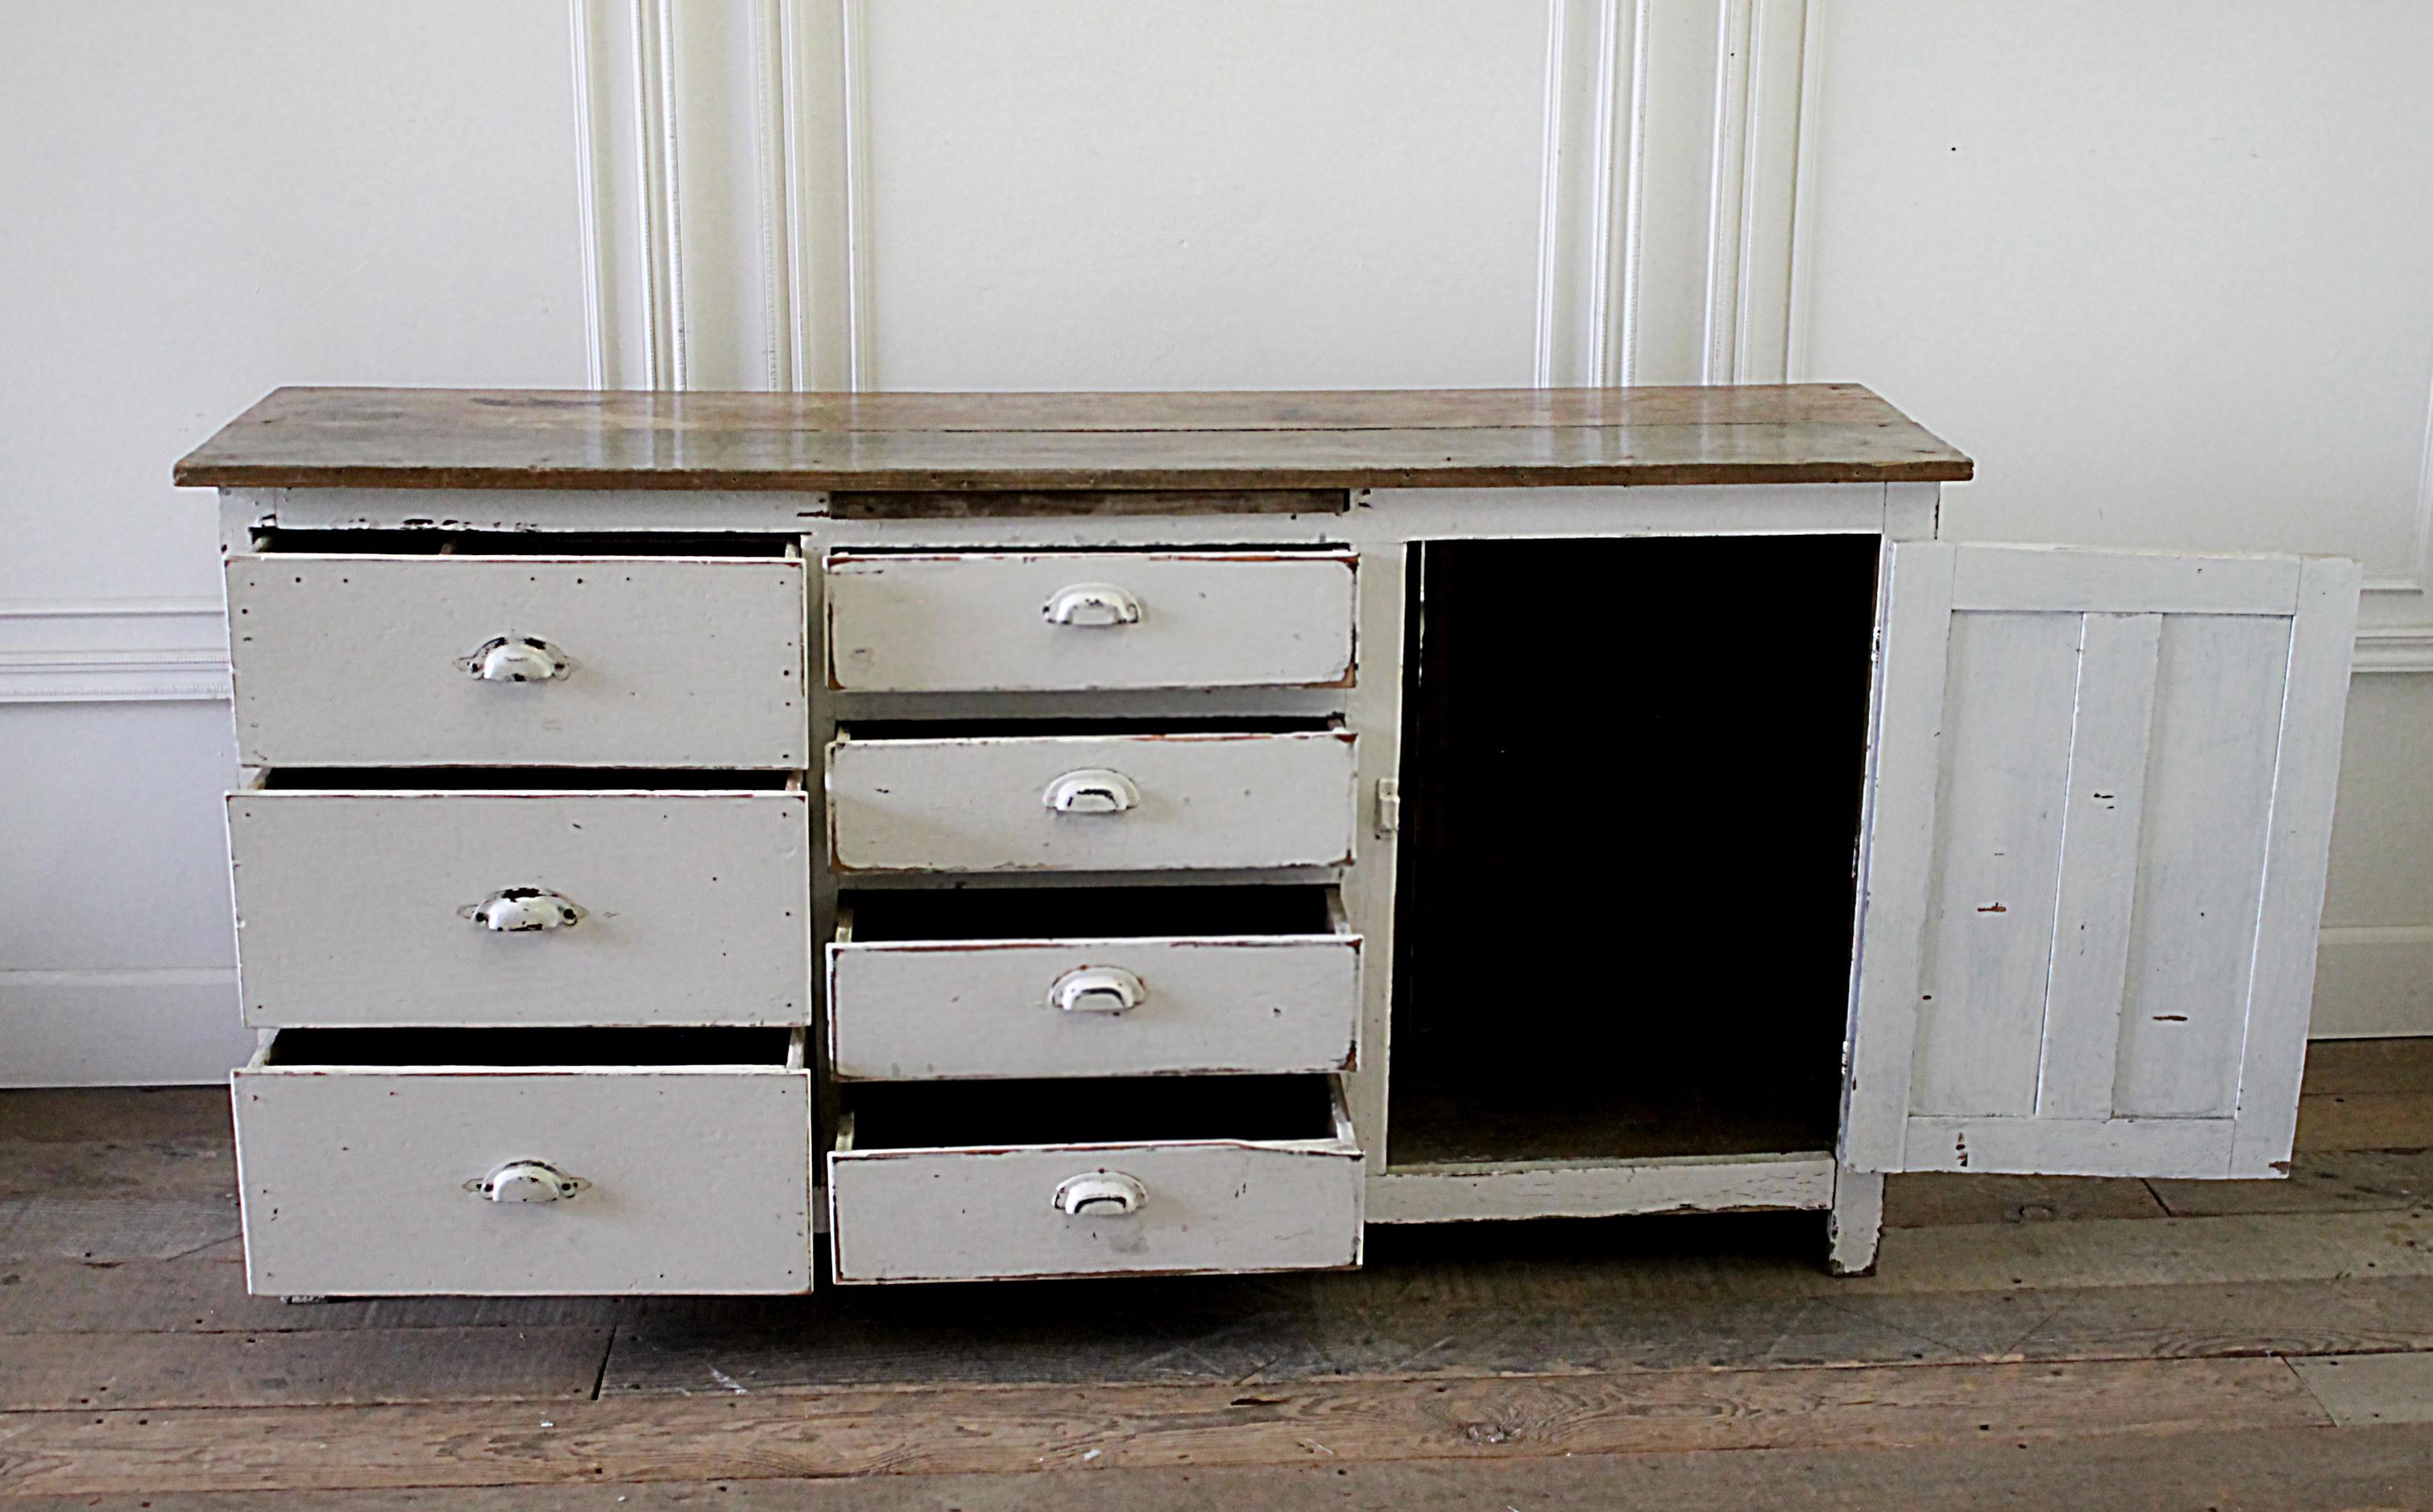 Antique European farmhouse style buffet server with wood top.
Late 19th century painted white primitive server with 7 drawers and single door with original hardware.
Original natural patina. There is a pullout / pull-out cutting or serving board